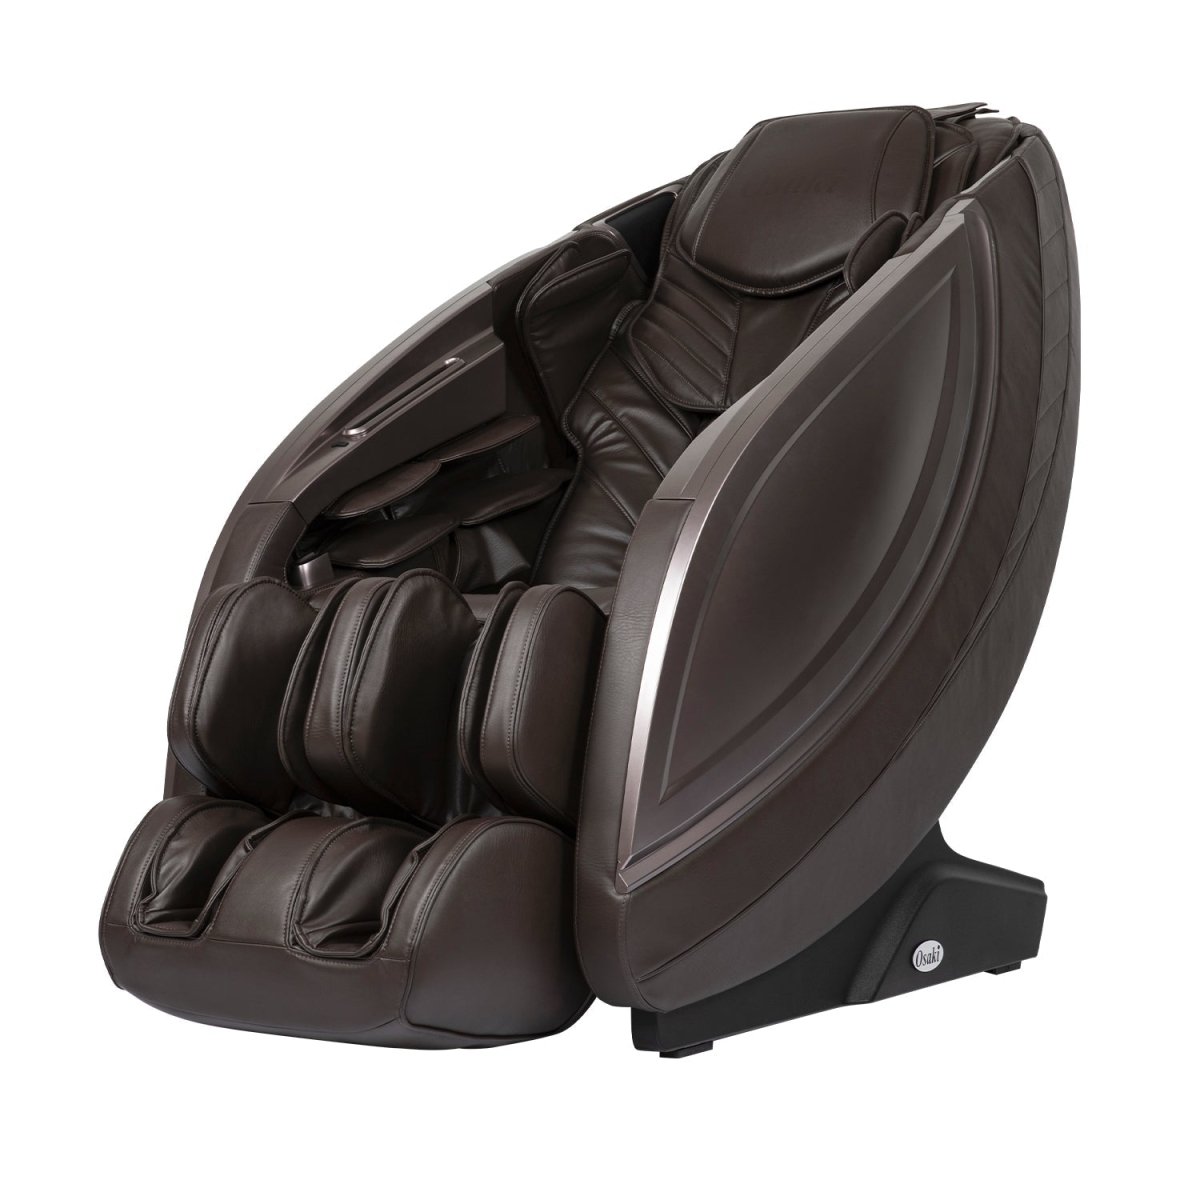 Titan reclining"  ><IMG border=0 width=1 height=1 src="https://ad.linksynergy.com/fs-bin/show?id=NL6SYUT*Zd8&bids=1267046.4933644070650970338&type=2&subid=0" ><br />
	OS-3D Premier 2023<br />
LINK ID	4933644070650970000	</a><br />
Pricing subjects to change<br />
Price	5598.95<br />
CATEGORY	Massage machine	</p>
<p><b> Osaki Titan  Chair </b><br />
<a target=